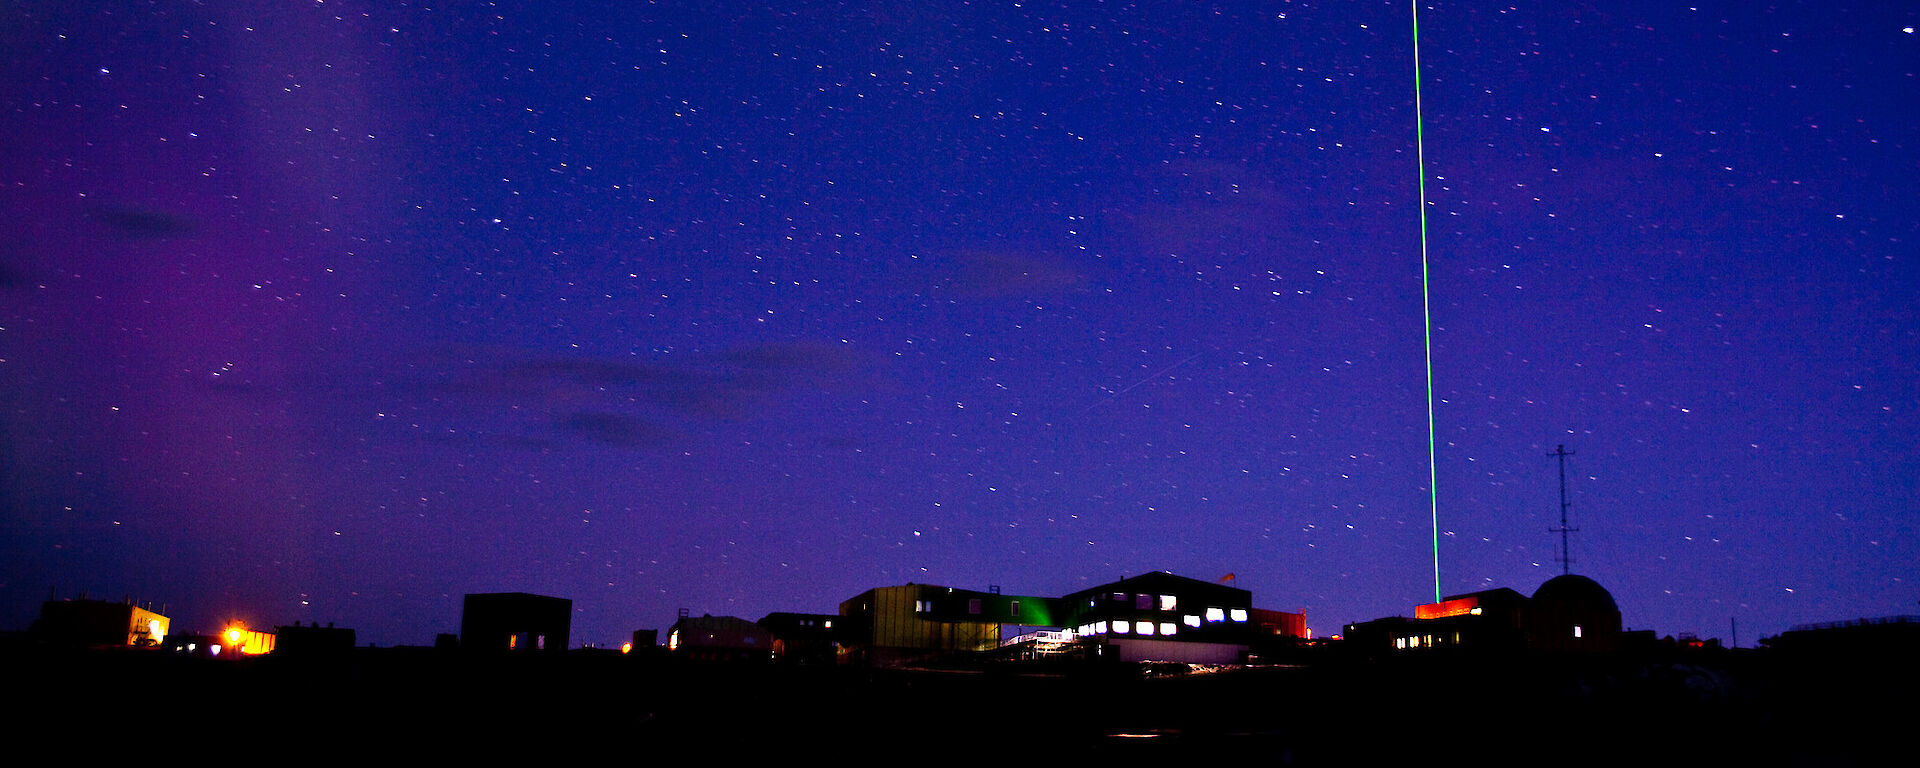 A night view of Davis station showing the LIDAR laser piercing the sky